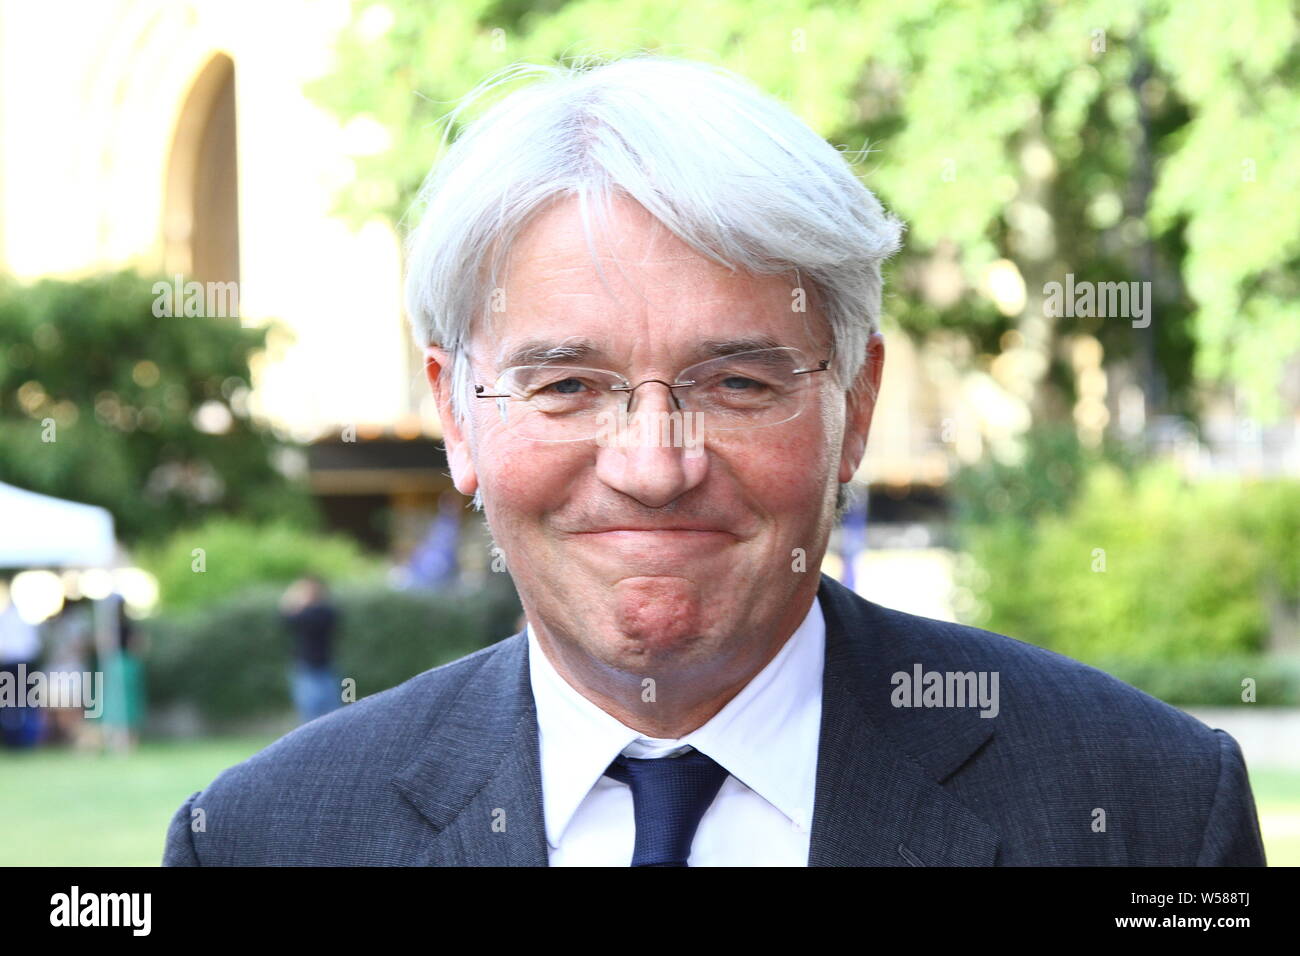 ANDREW MITCHEL MP PICTURED AT COLLEGE GREEN IN THE CITY OF WESTMINSTER ON 24TH JULY 2019. CONSERVATIVE PARTY MPS. BRITISH POLITICIANS. UK POLITICS. TORY PARTY. TORIES. WHIP. CHIEF WHIP. PLEBGATE. Stock Photo